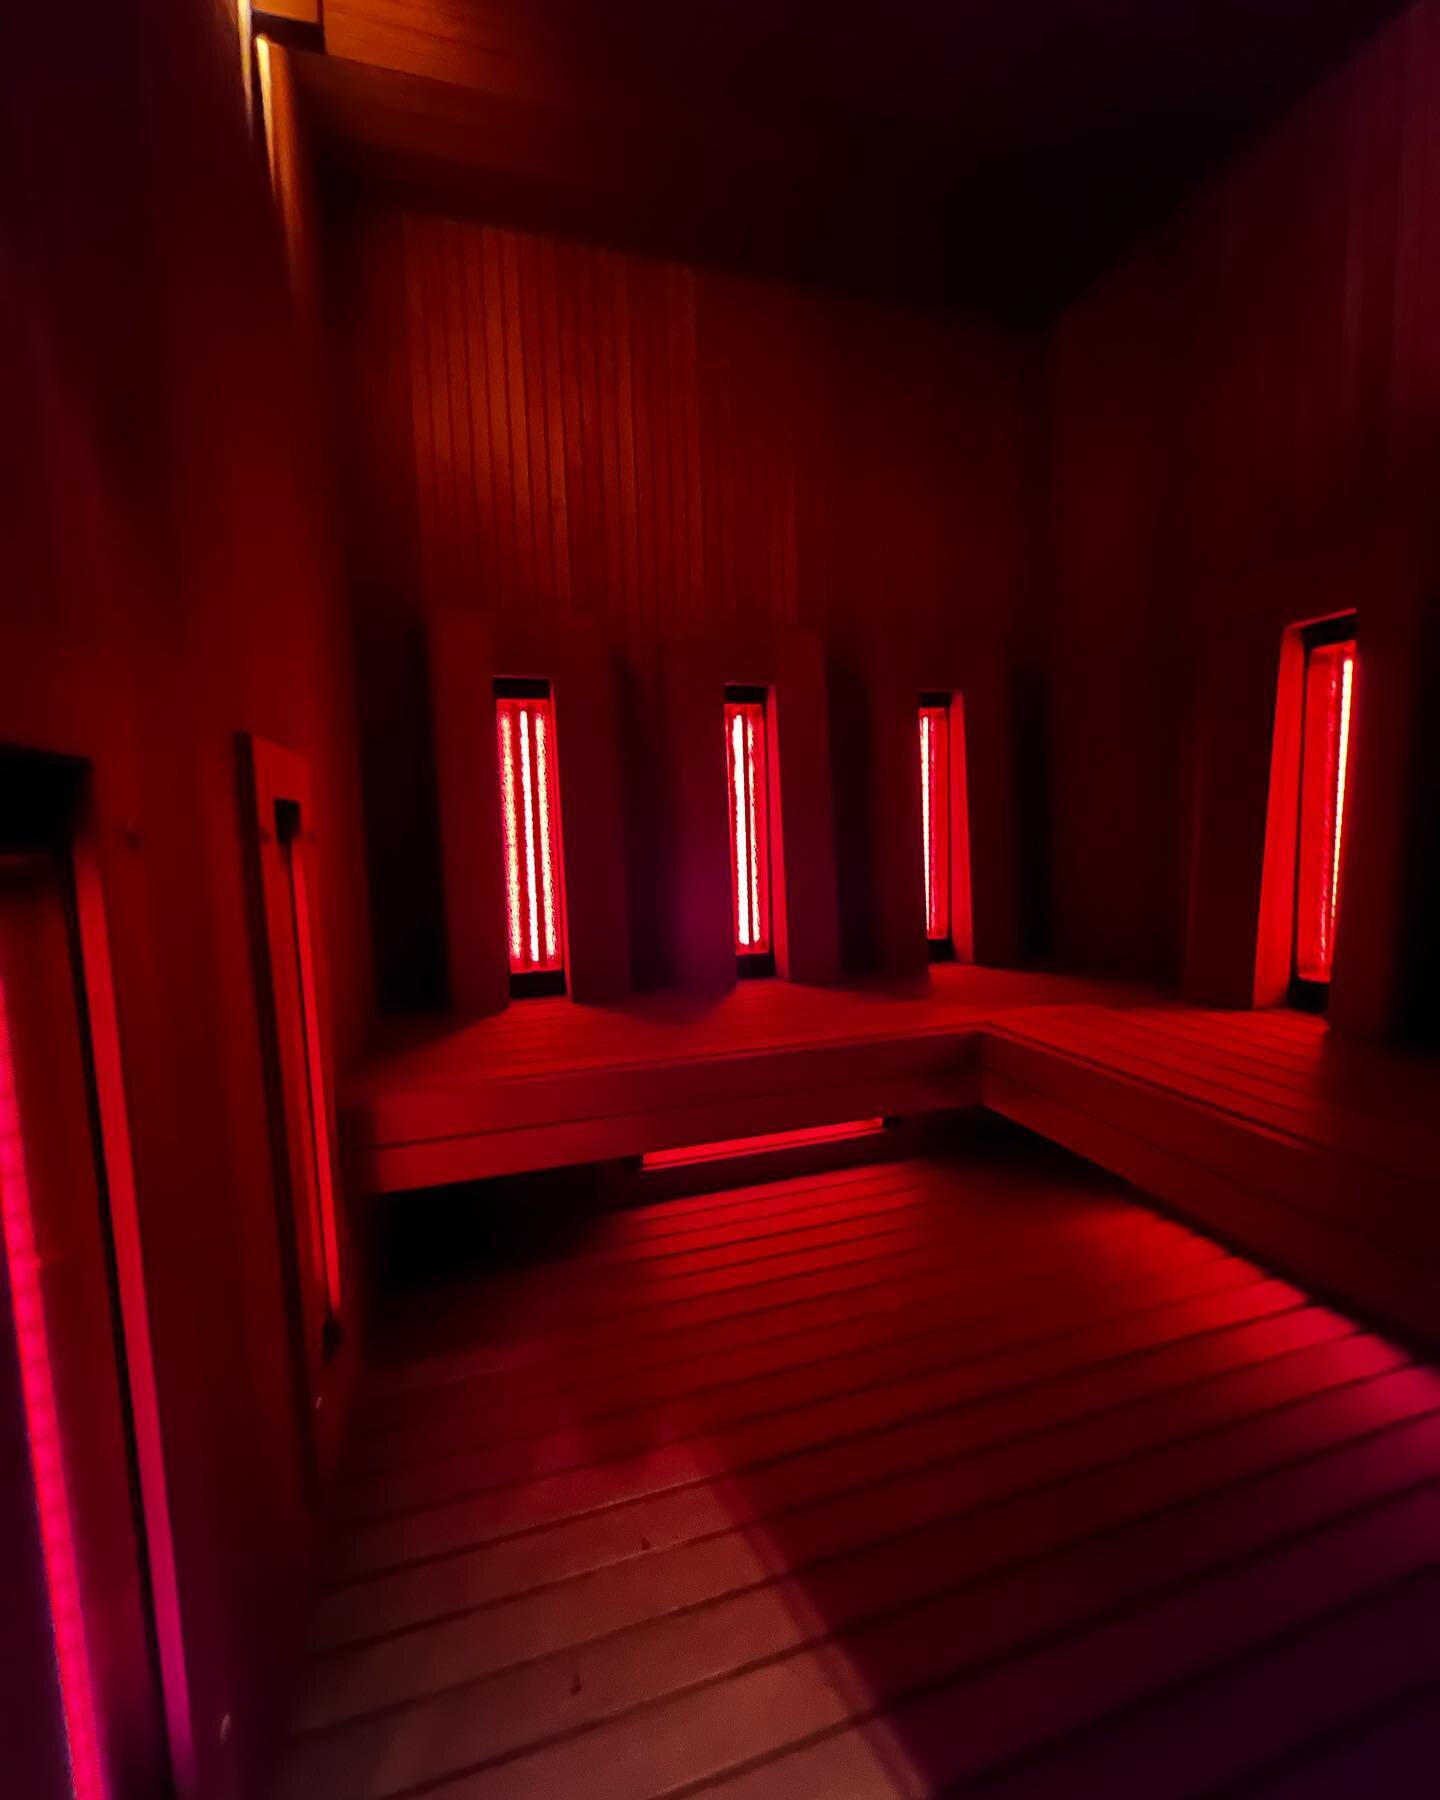 DID YOU KNOW?
There are many health benefits that come with an infra red sauna including&hellip;
Flushing out toxins from your system.
Assists in weight loss.
Relief from joint pains.
Boosts blood circulation.
Provides clearer and tighter skin

Try o